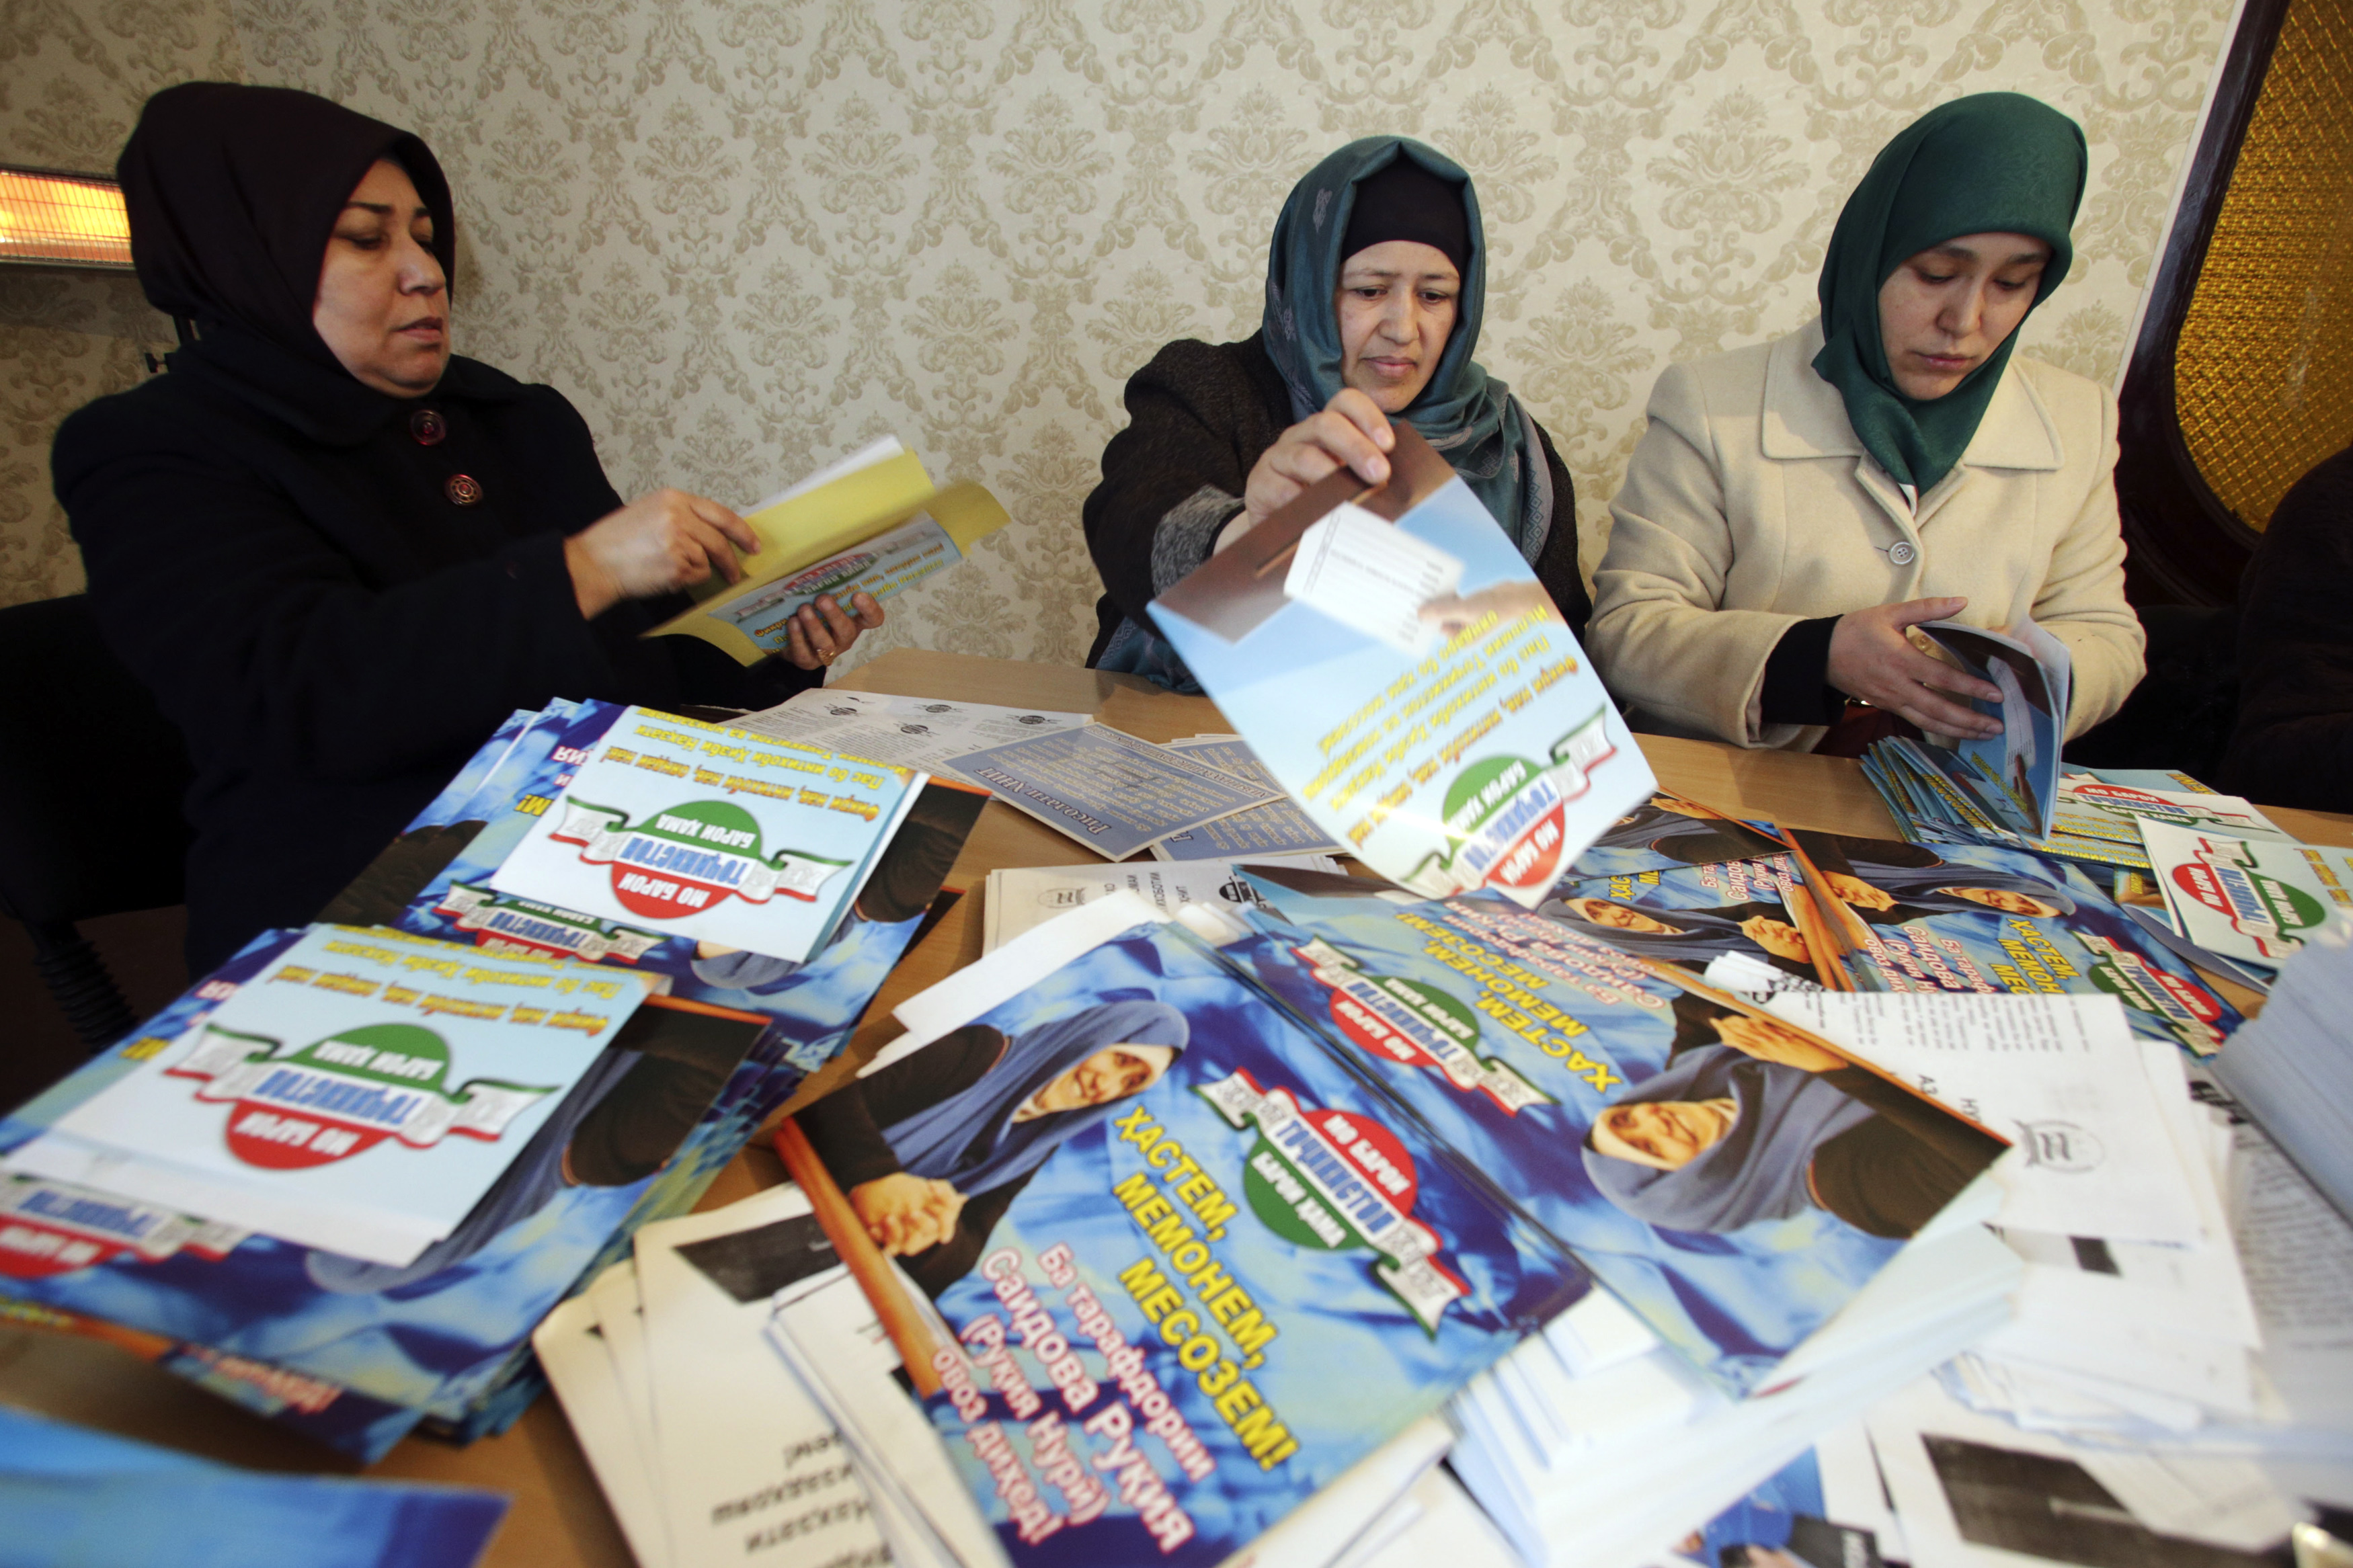 Supporters of the Islamic Renaissance Party of Tajikistan (IRPT) sort pre-election leaflets at the party headquarters in the Tajik capital, Dushanbe, 26 February 2015